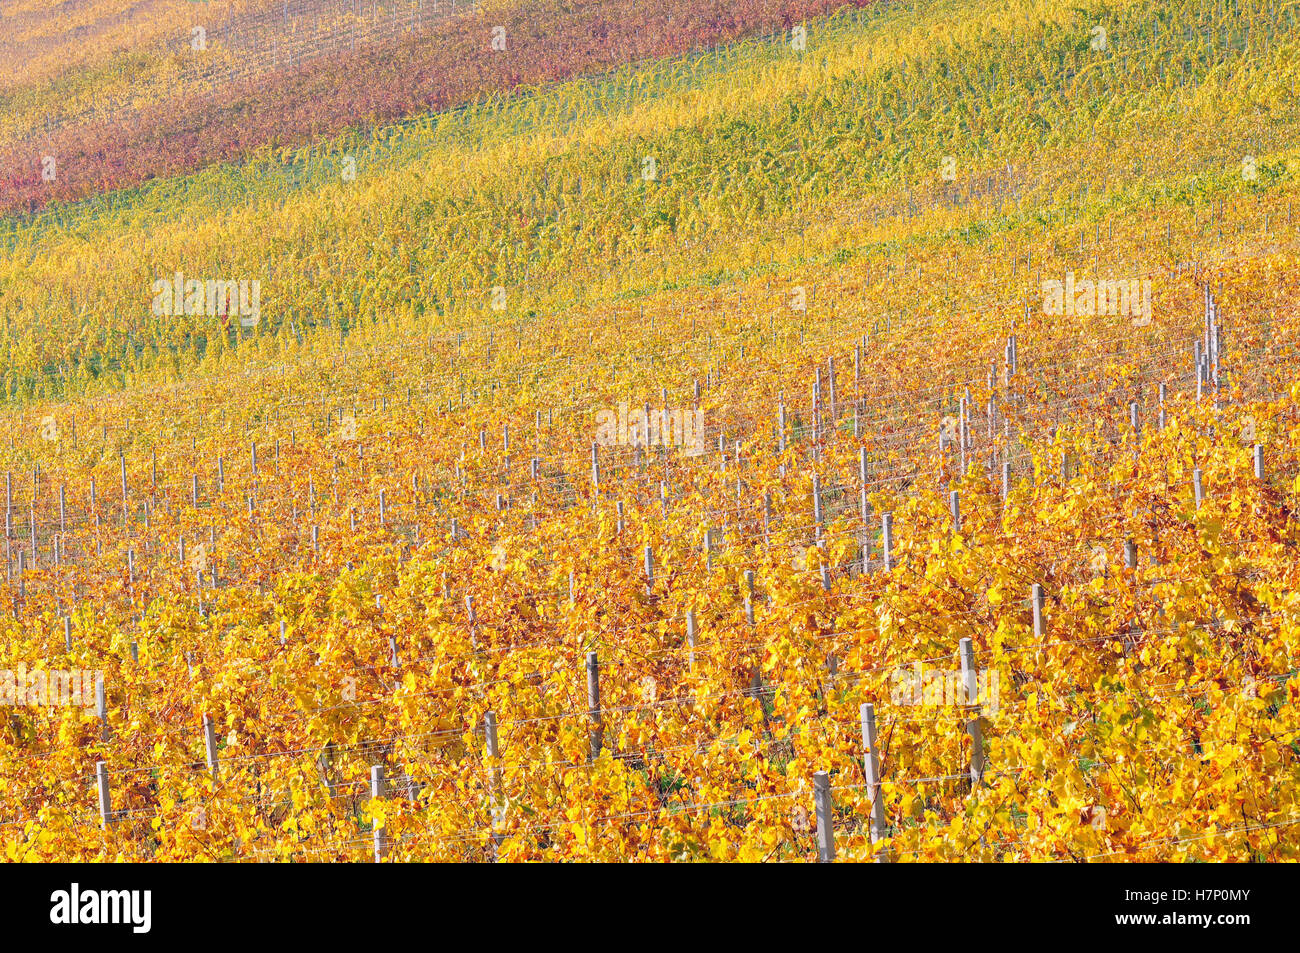 Colourful vineyards on a bright sunny autumn day Stock Photo